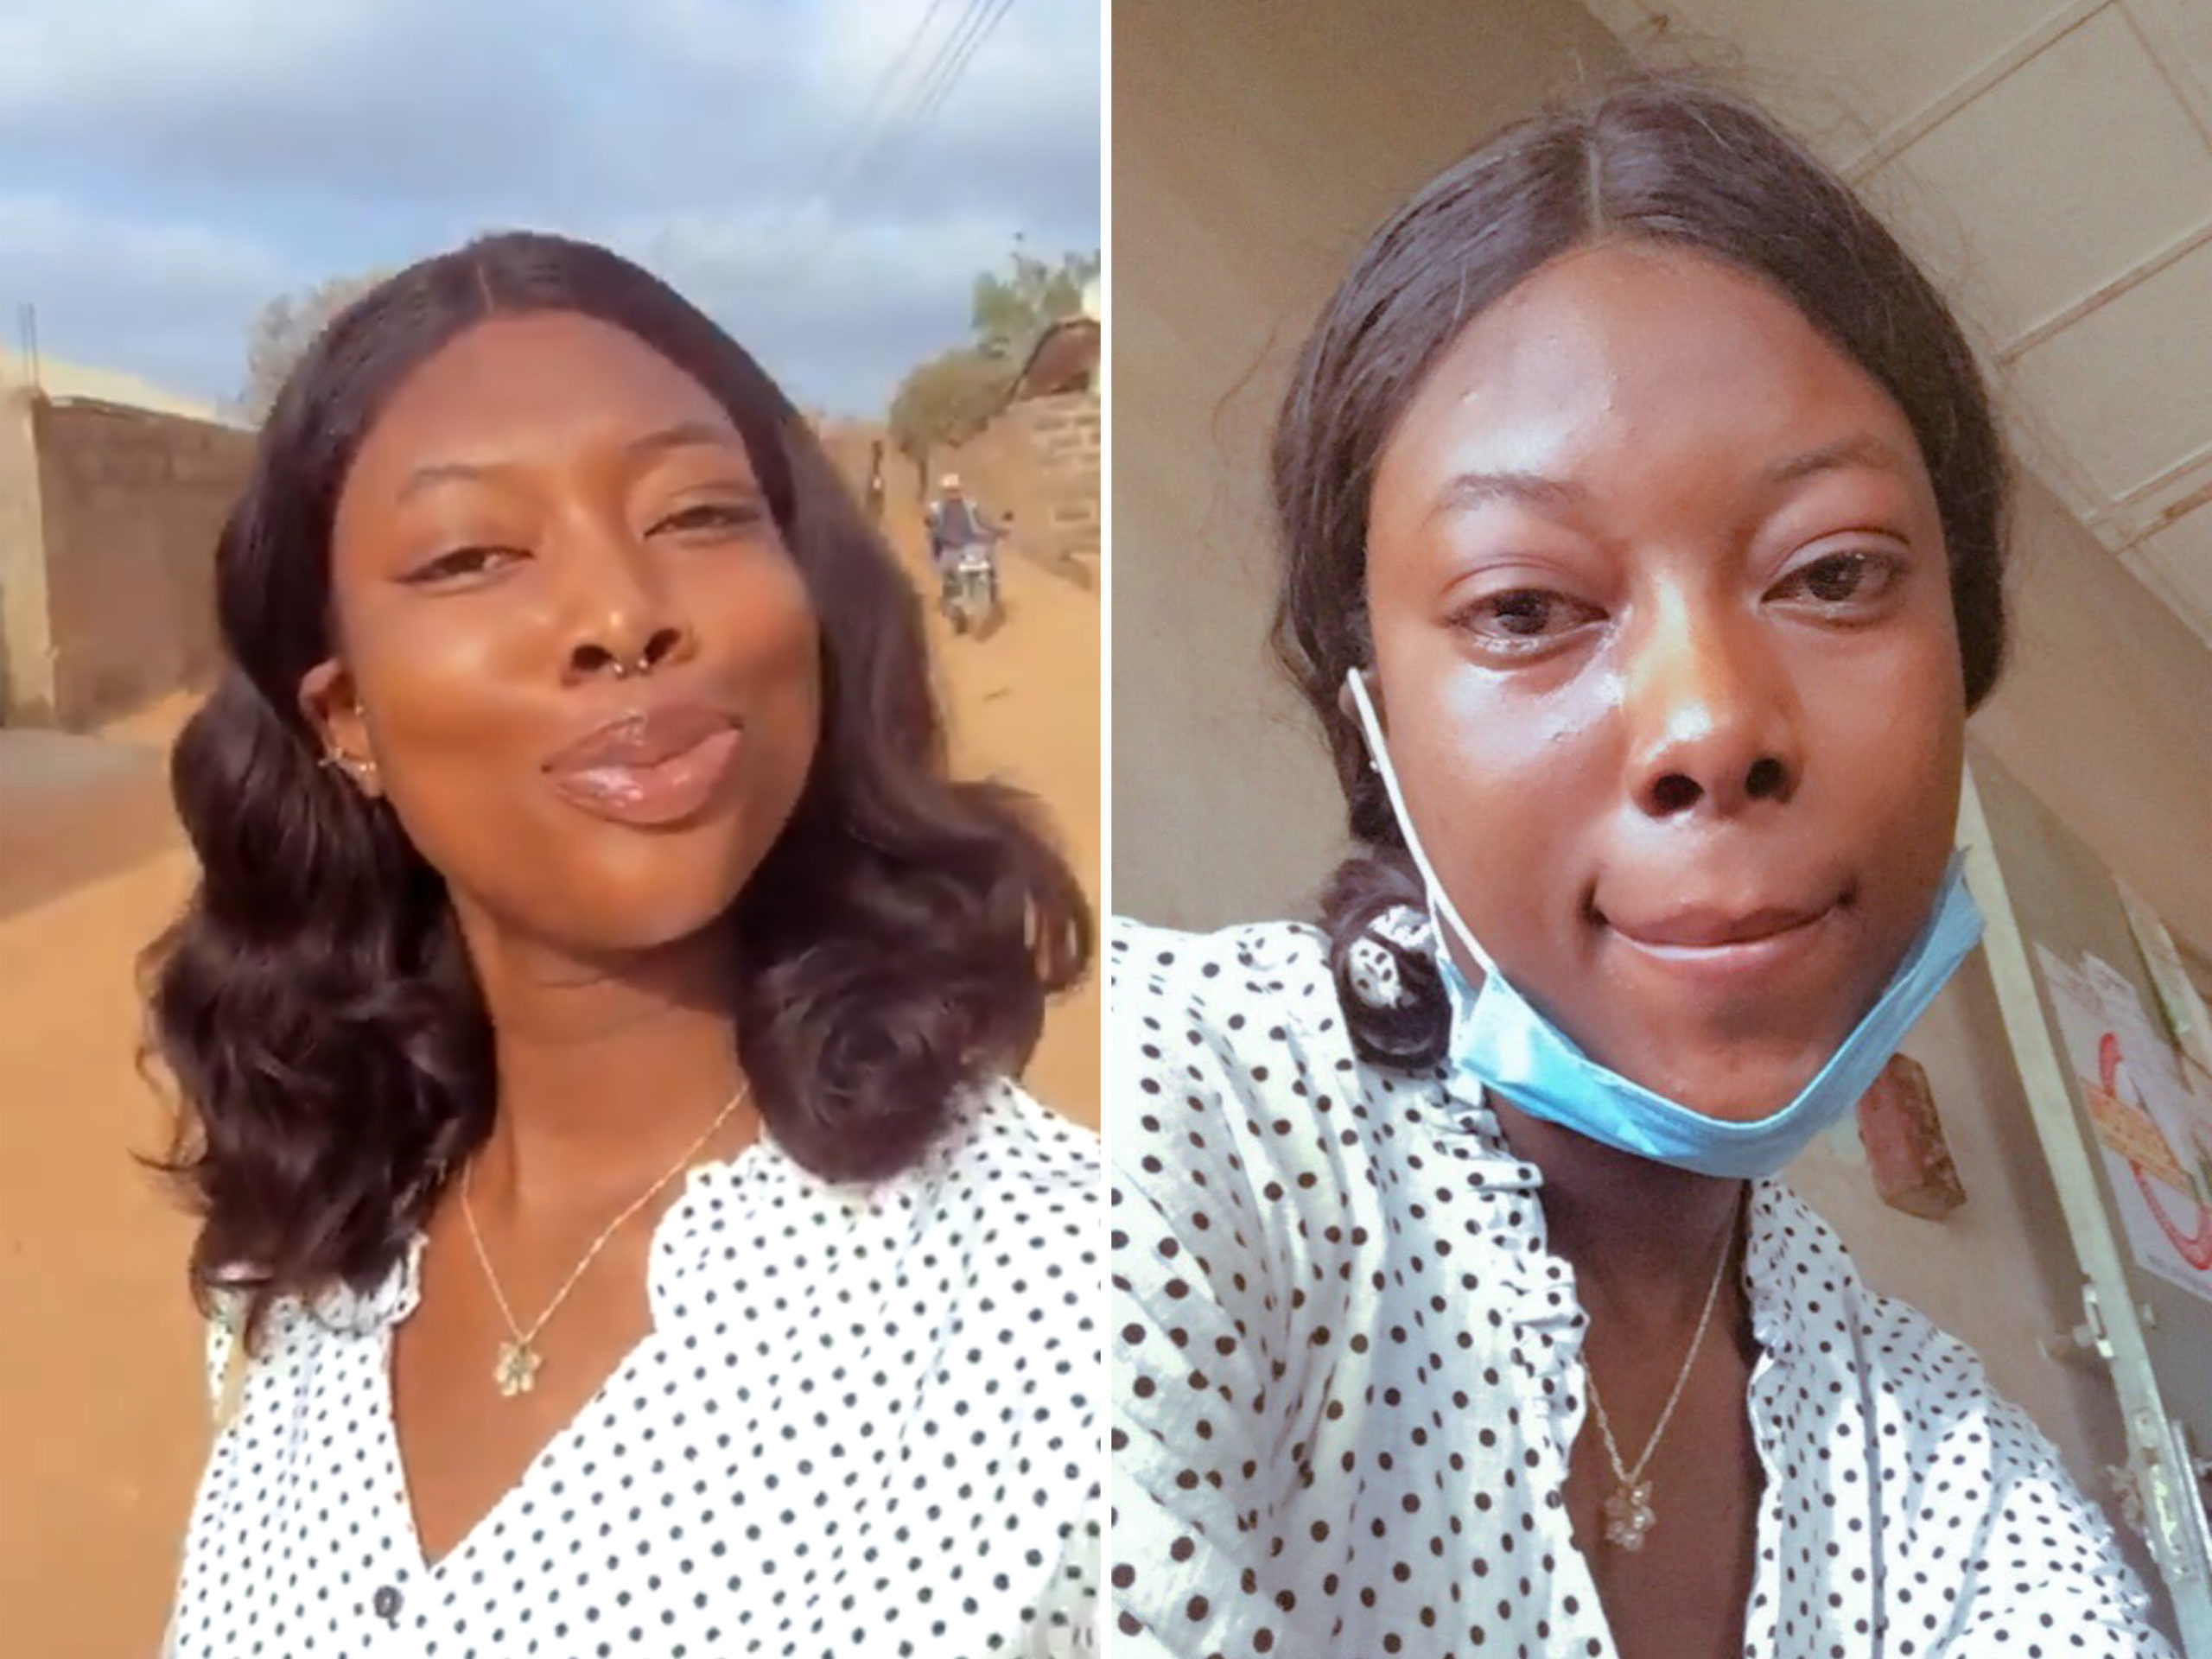 Dress Code: Mixed Reactions As Unilorin Student Narrates How She Was Forced To Remove Nose Ring, Pack Hair By School’s Security Officials